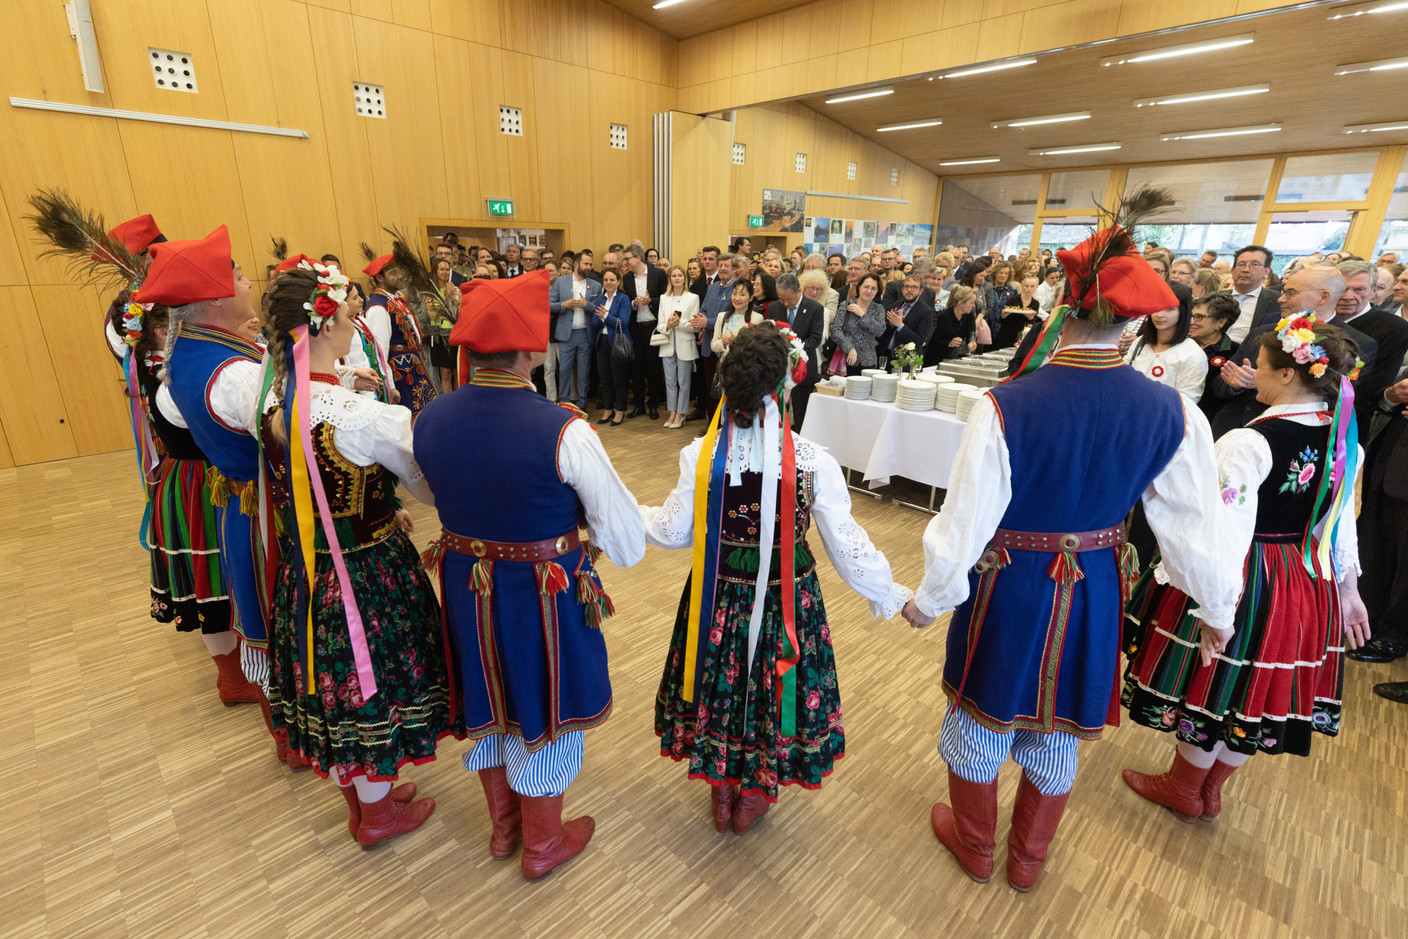 The 3rd May Constitution Day event featured a traditional Polish dance. Photo: Guy Wolff/Maison Moderne